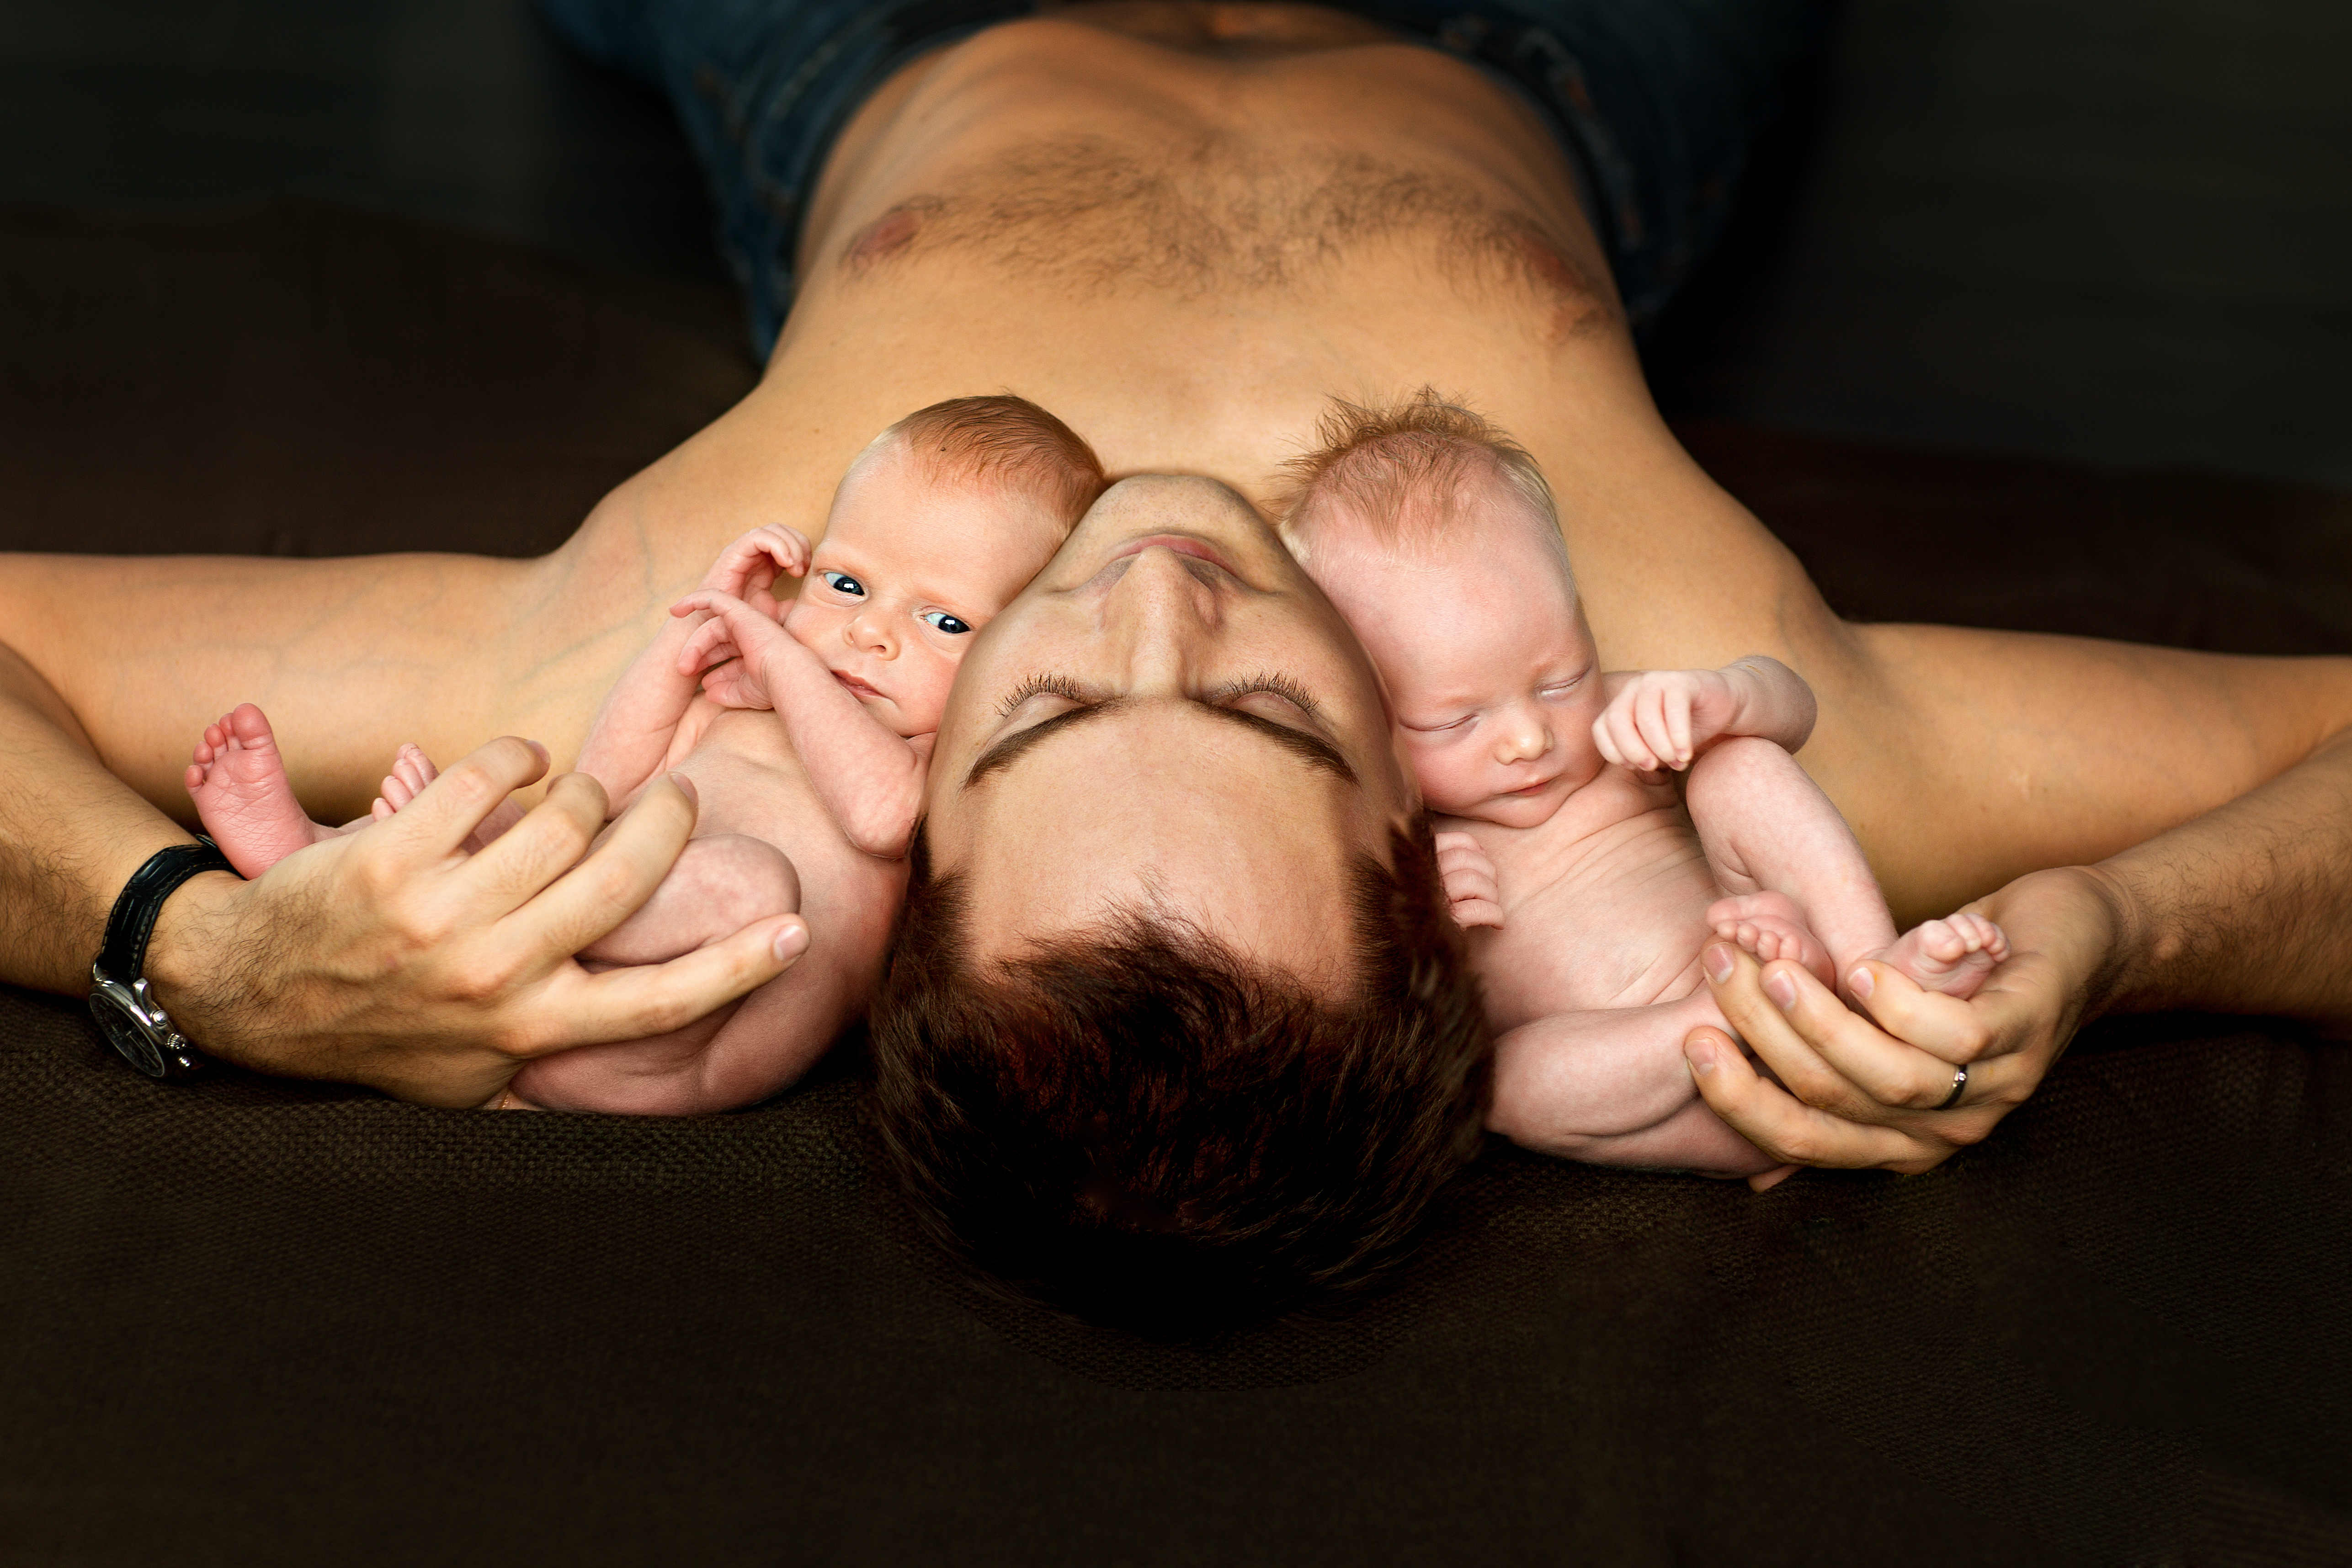 A man with two babies. | Source: Shutterstock